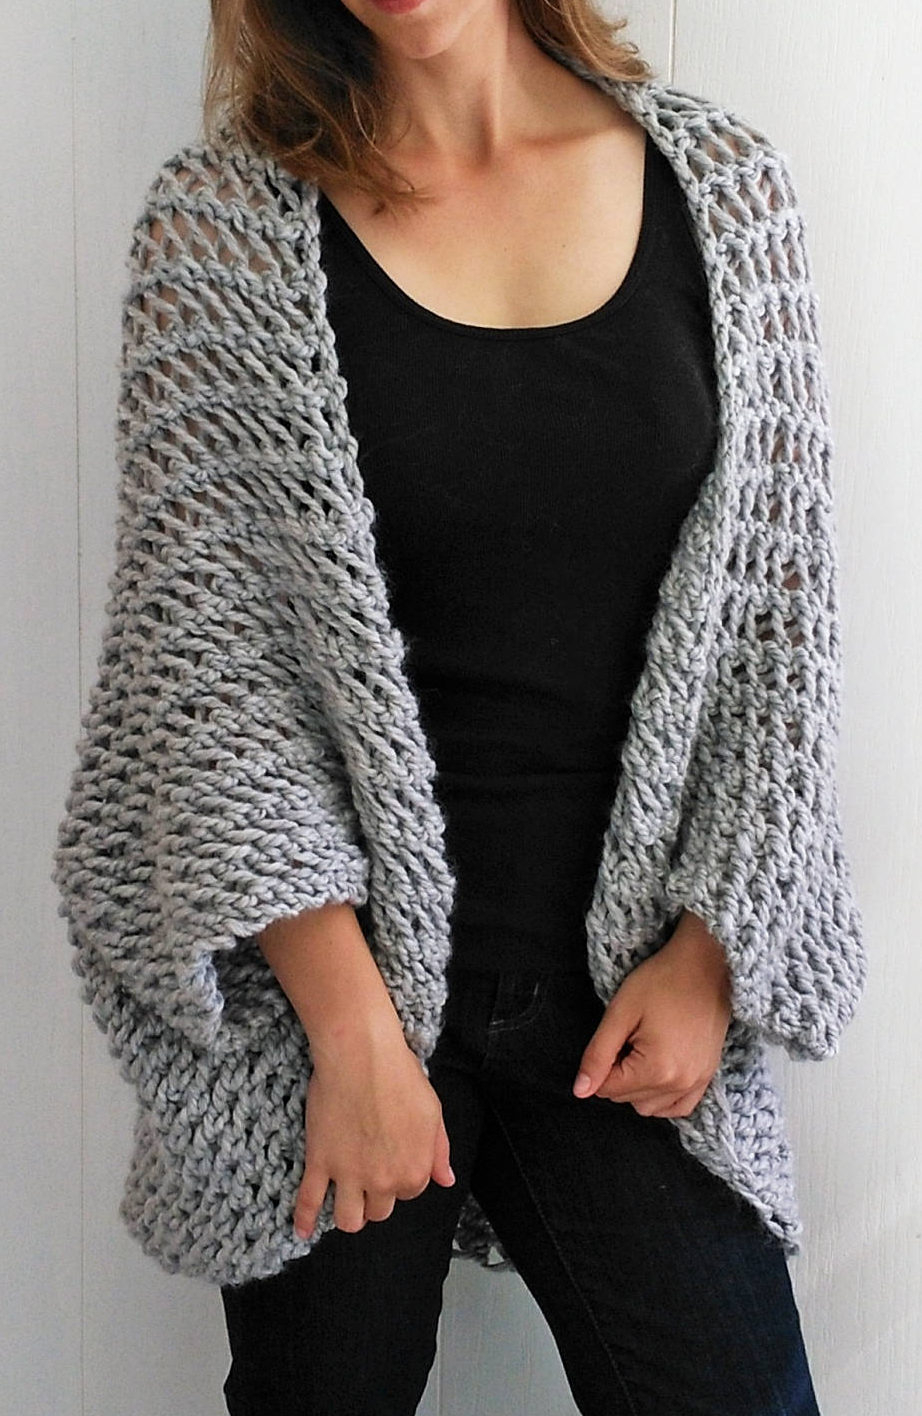 Free Knitting Patterns For Sweater Coats Easy Cardigan Knitting Patterns In The Loop Knitting